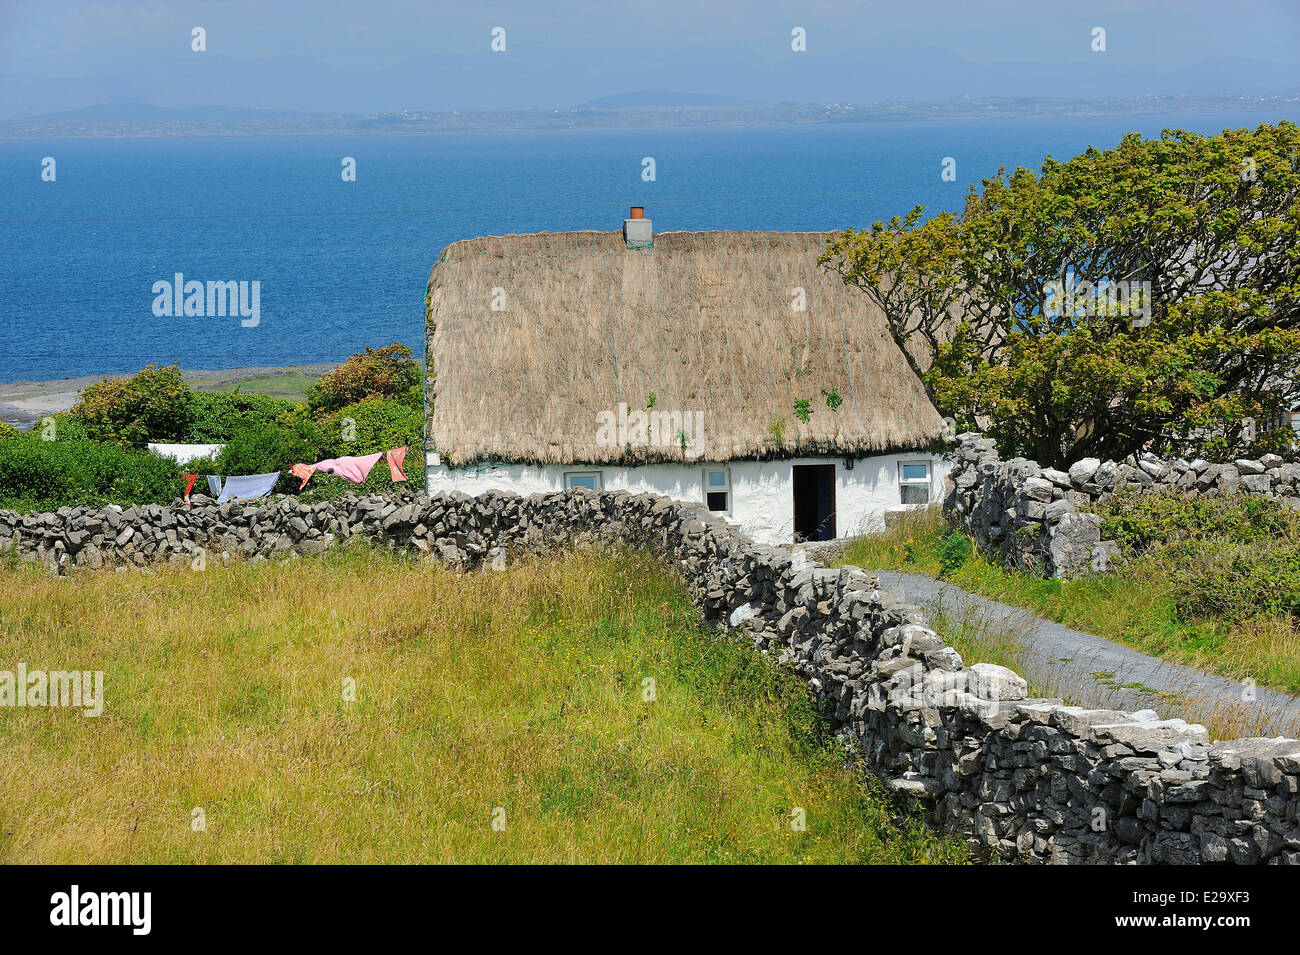 Ireland, County Galway, Aran Islands, Inishmore, Thatched Cottage Stock Photo